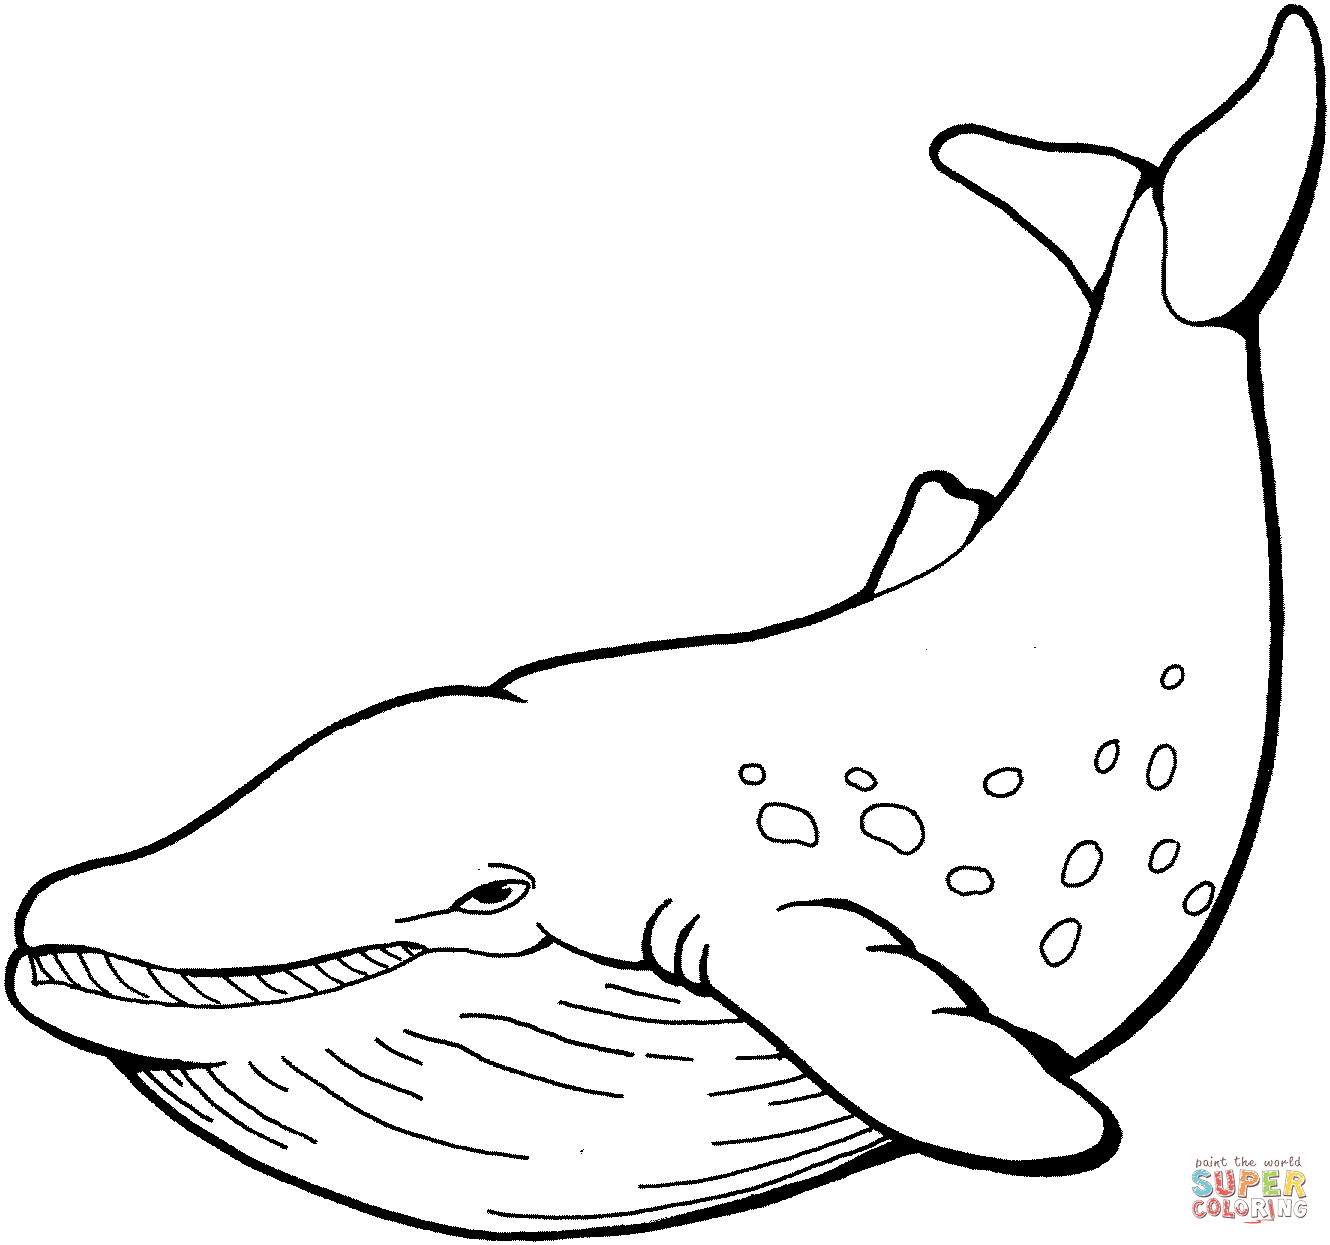 Whale 2 coloring page | Free Printable Coloring Pages